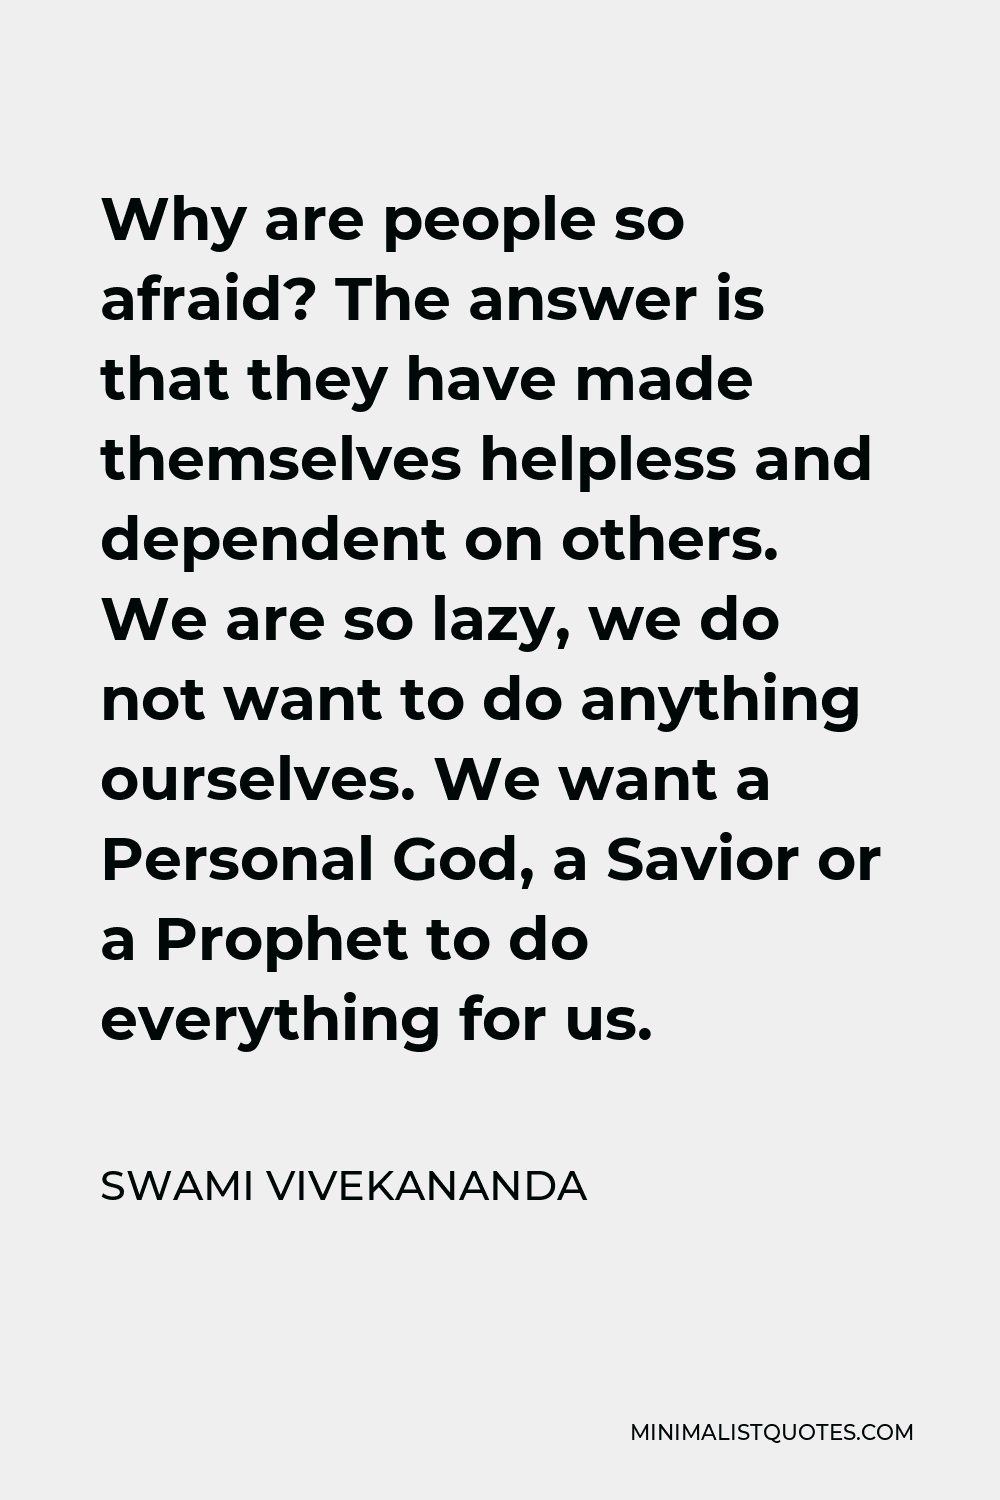 Swami Vivekananda Quote - Why are people so afraid? The answer is that they have made themselves helpless and dependent on others. We are so lazy, we do not want to do anything ourselves. We want a Personal God, a Savior or a Prophet to do everything for us.